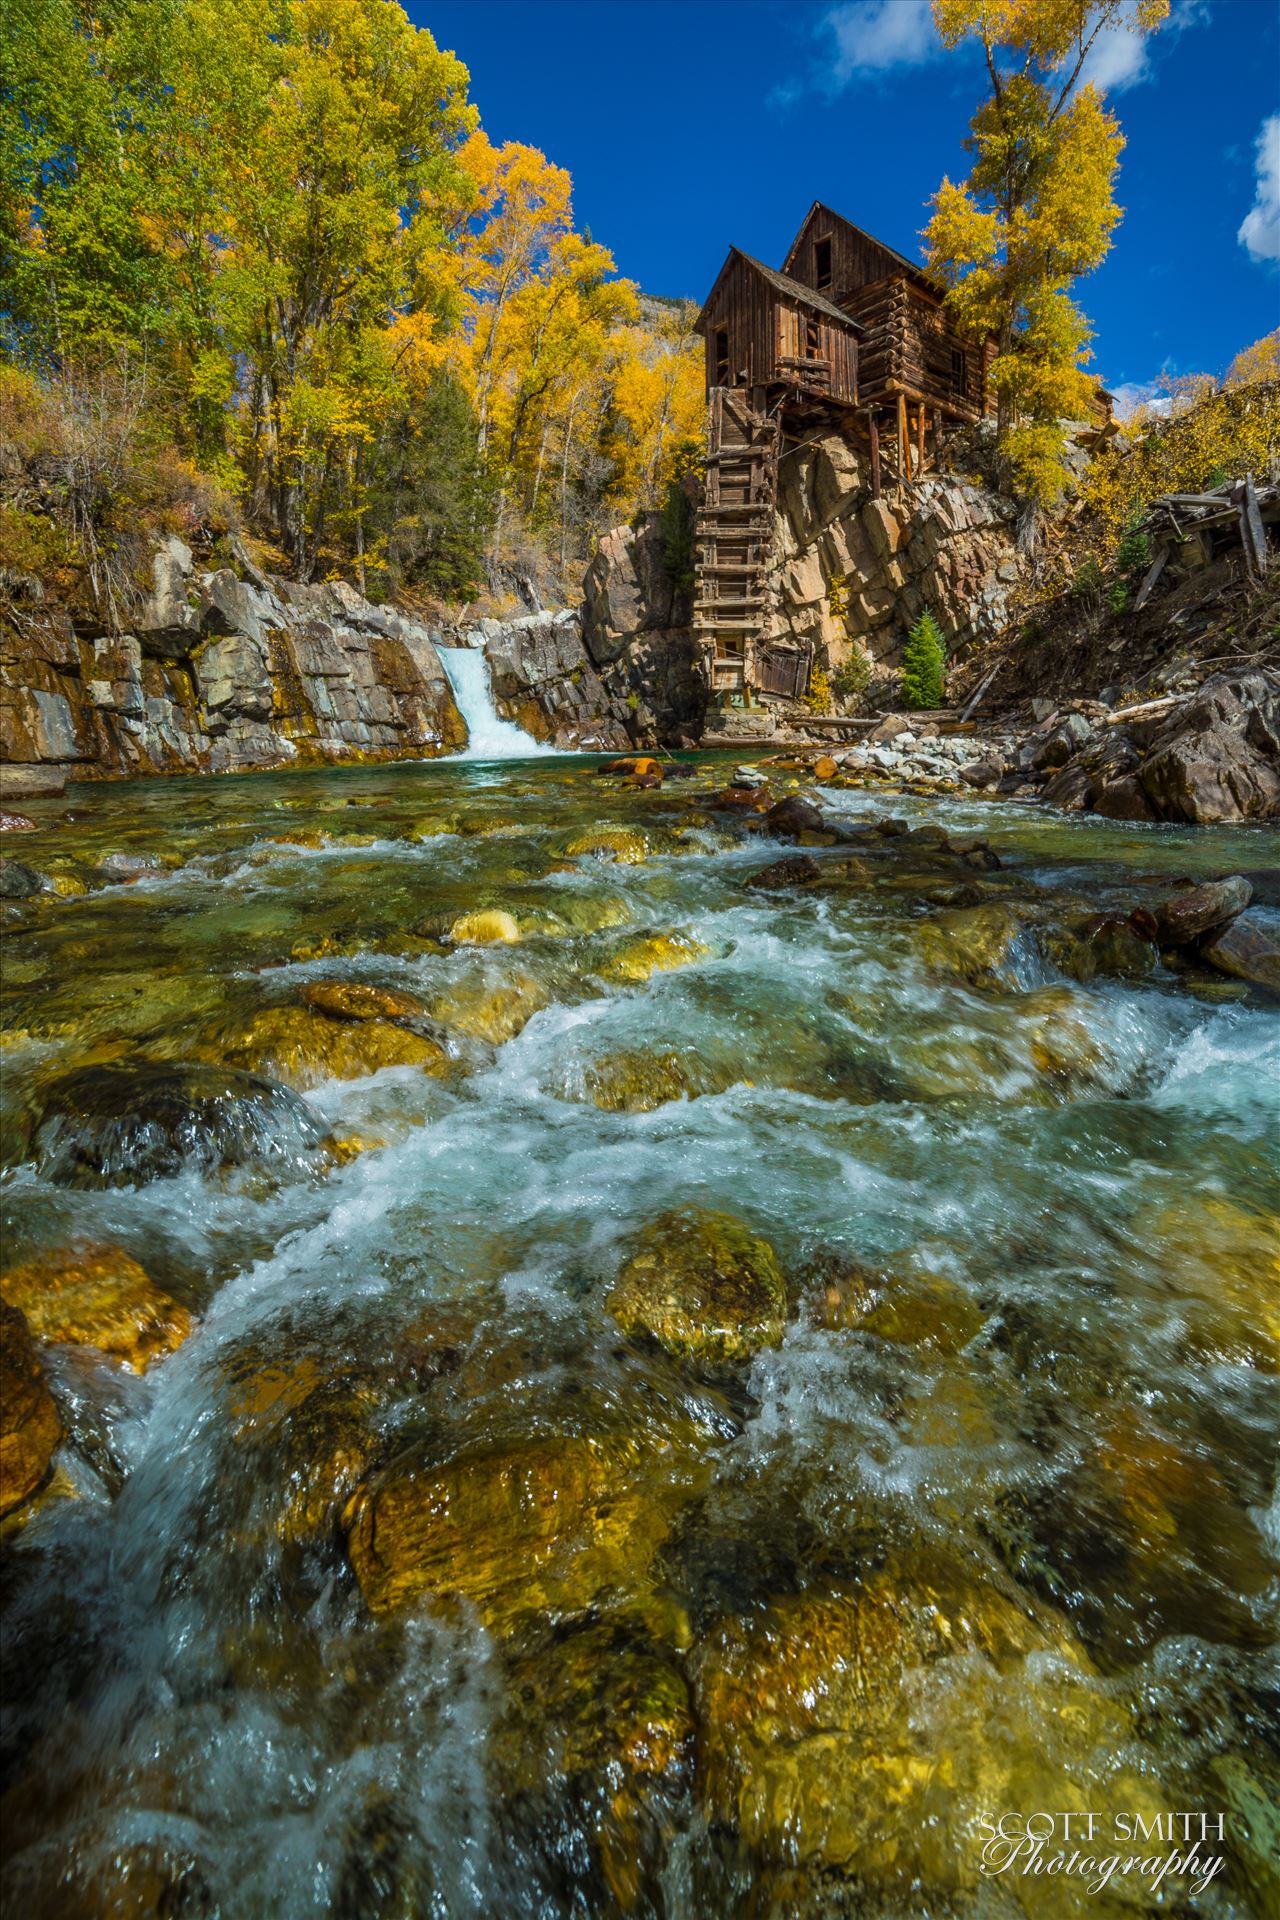 Crystal Mill, Colorado 02 - The Crystal Mill, or the Old Mill is an 1892 wooden powerhouse located on an outcrop above the Crystal River in Crystal, Colorado by Scott Smith Photos